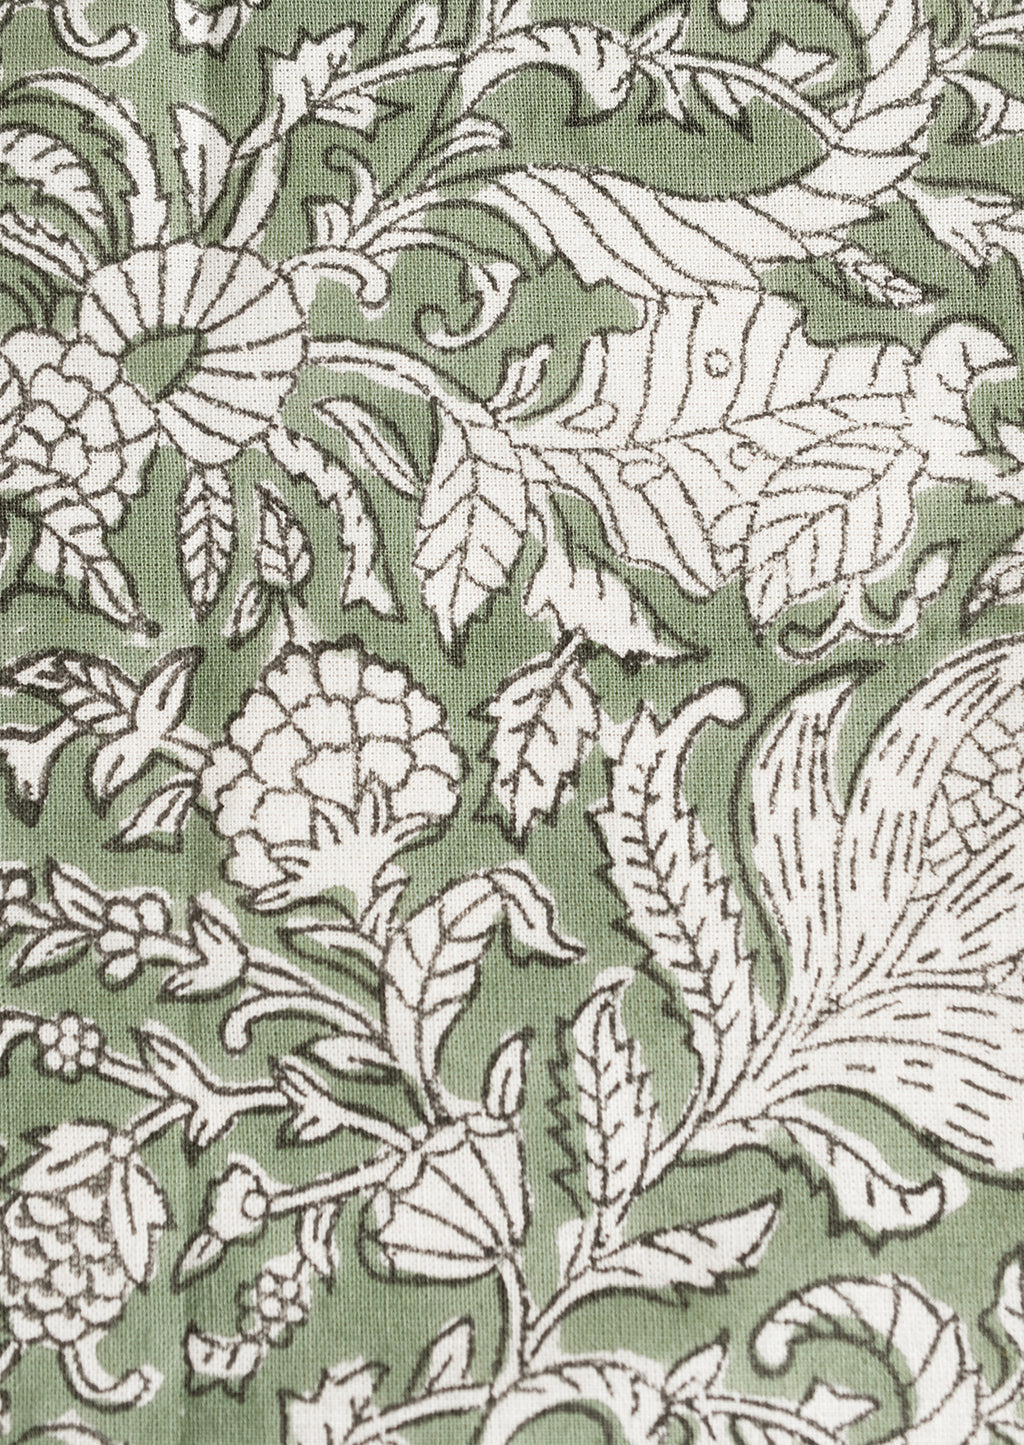 3: A pair of block print napkins in ivy green with black and white floral print.